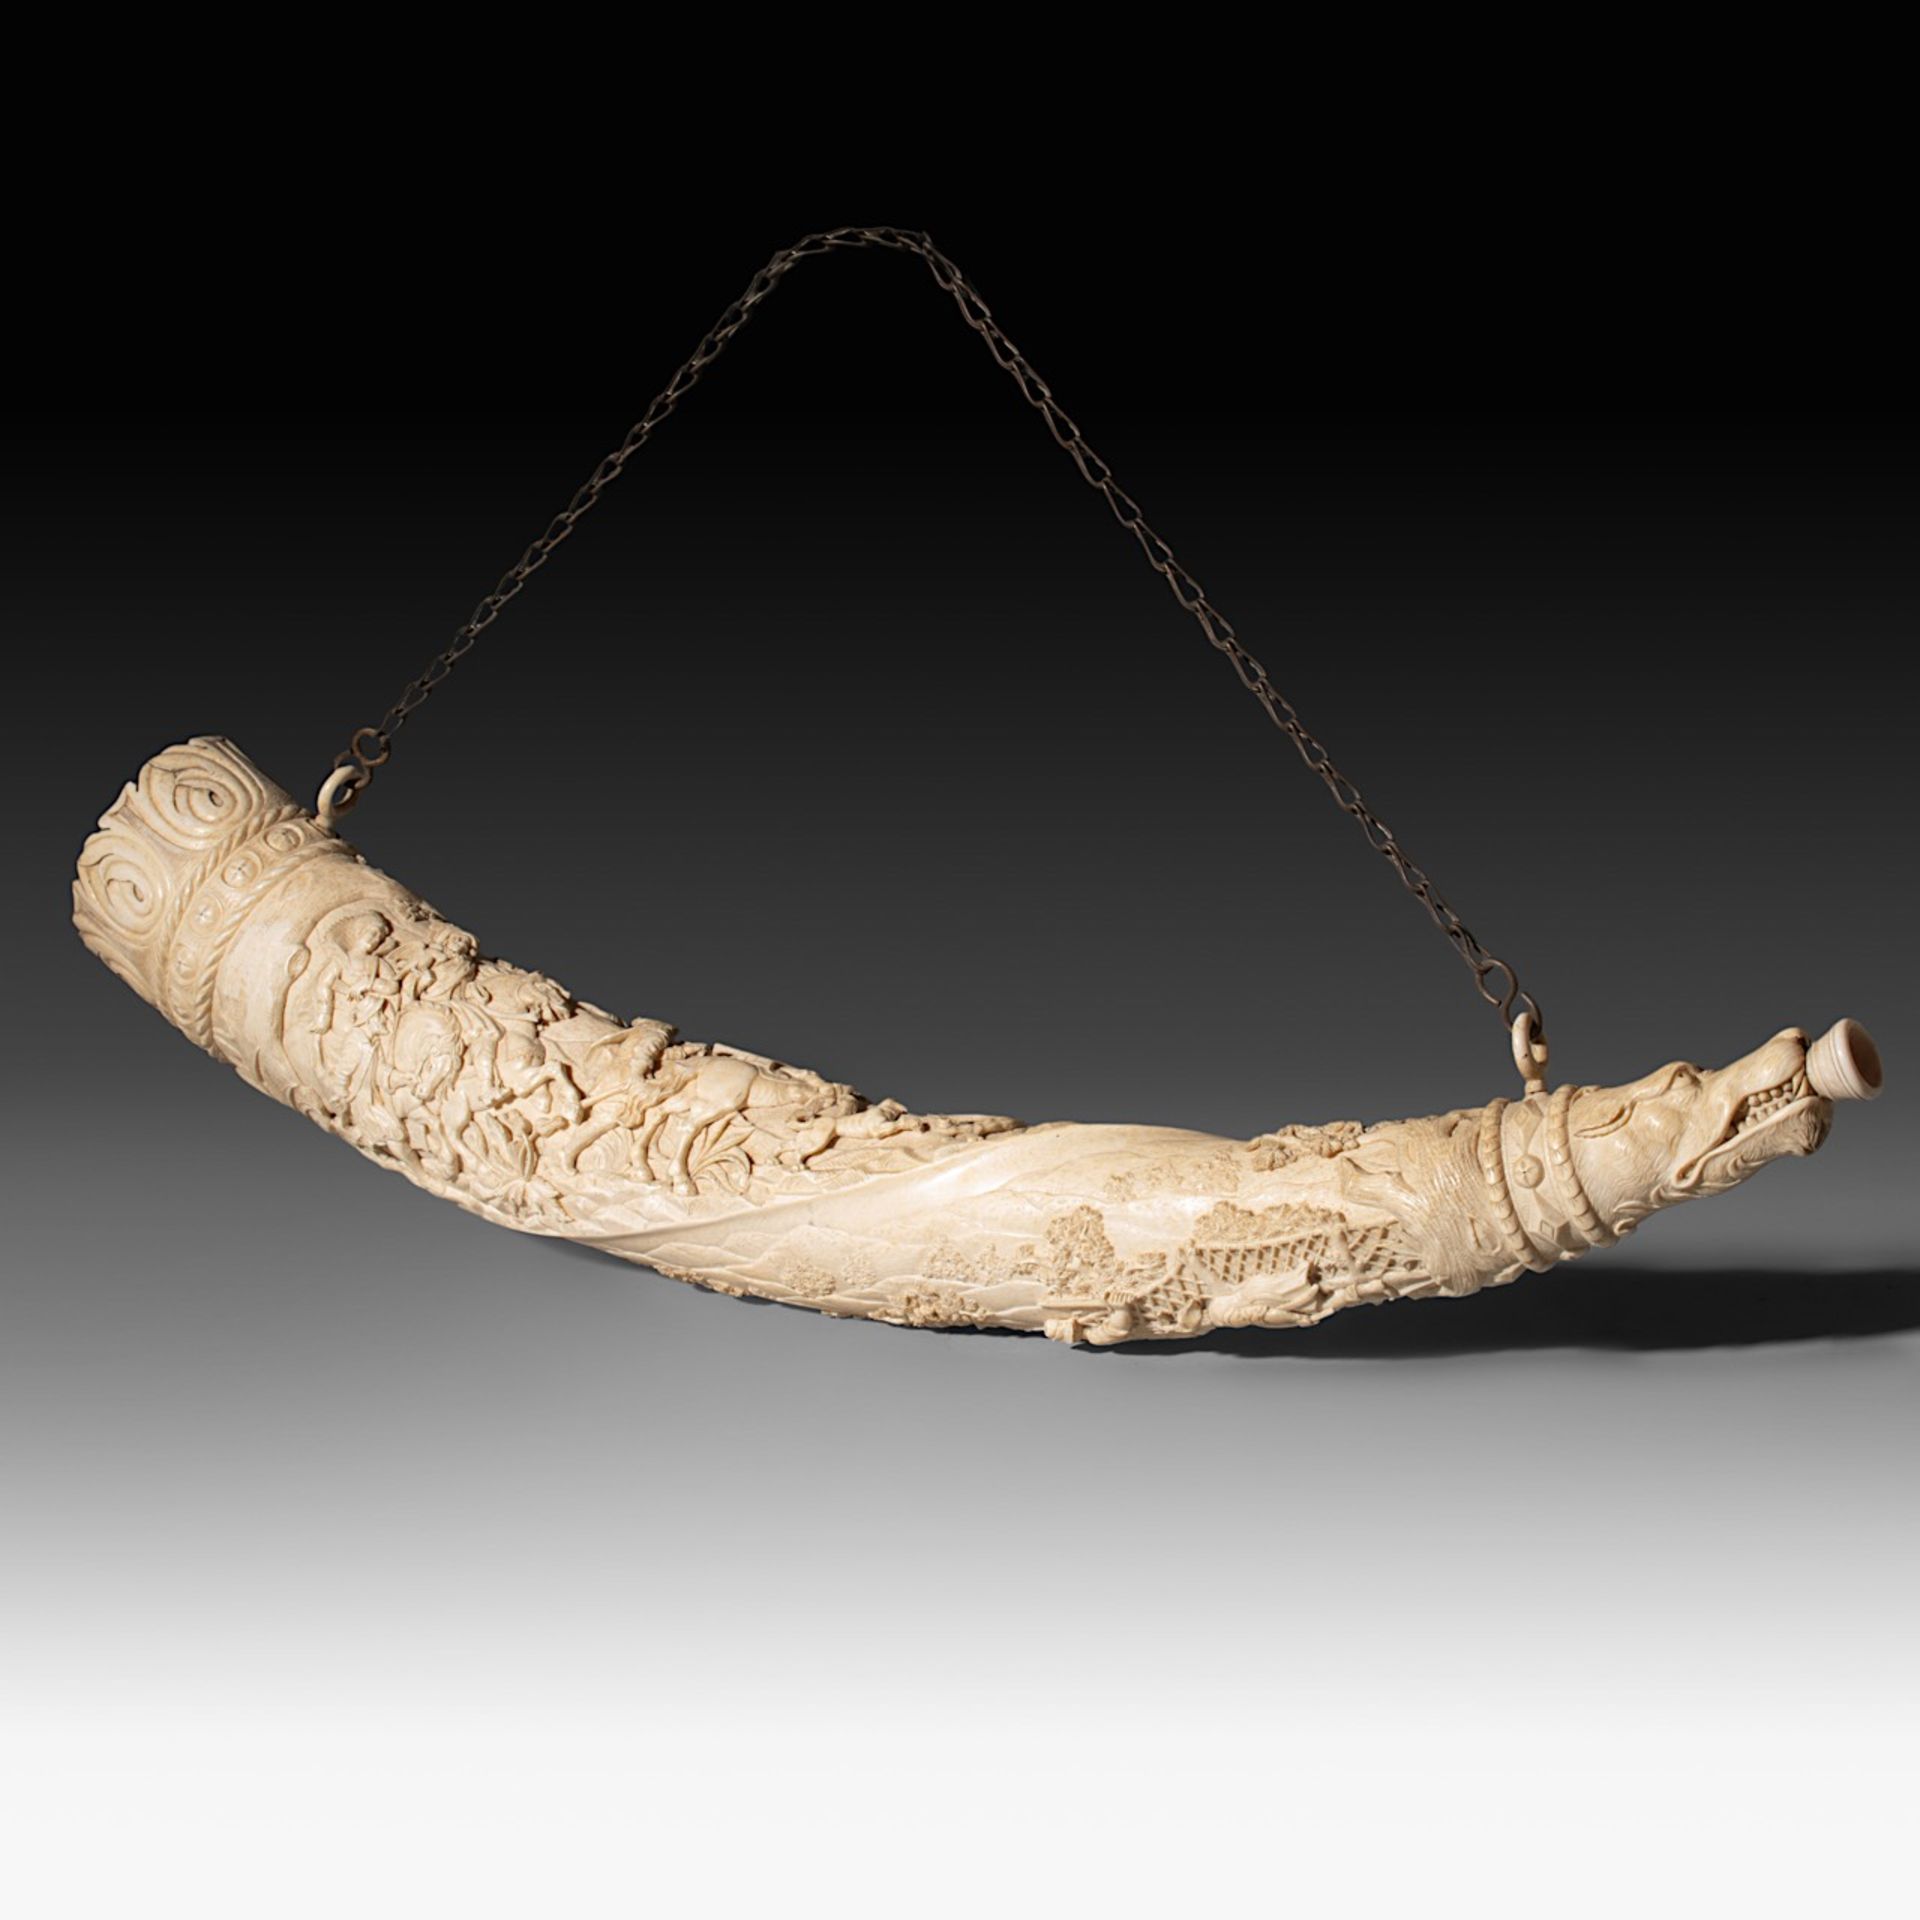 A 19th-century ivory hunting horn, last quarter 19th century, W 74,5 cm - 2850 g (+) - Image 4 of 11